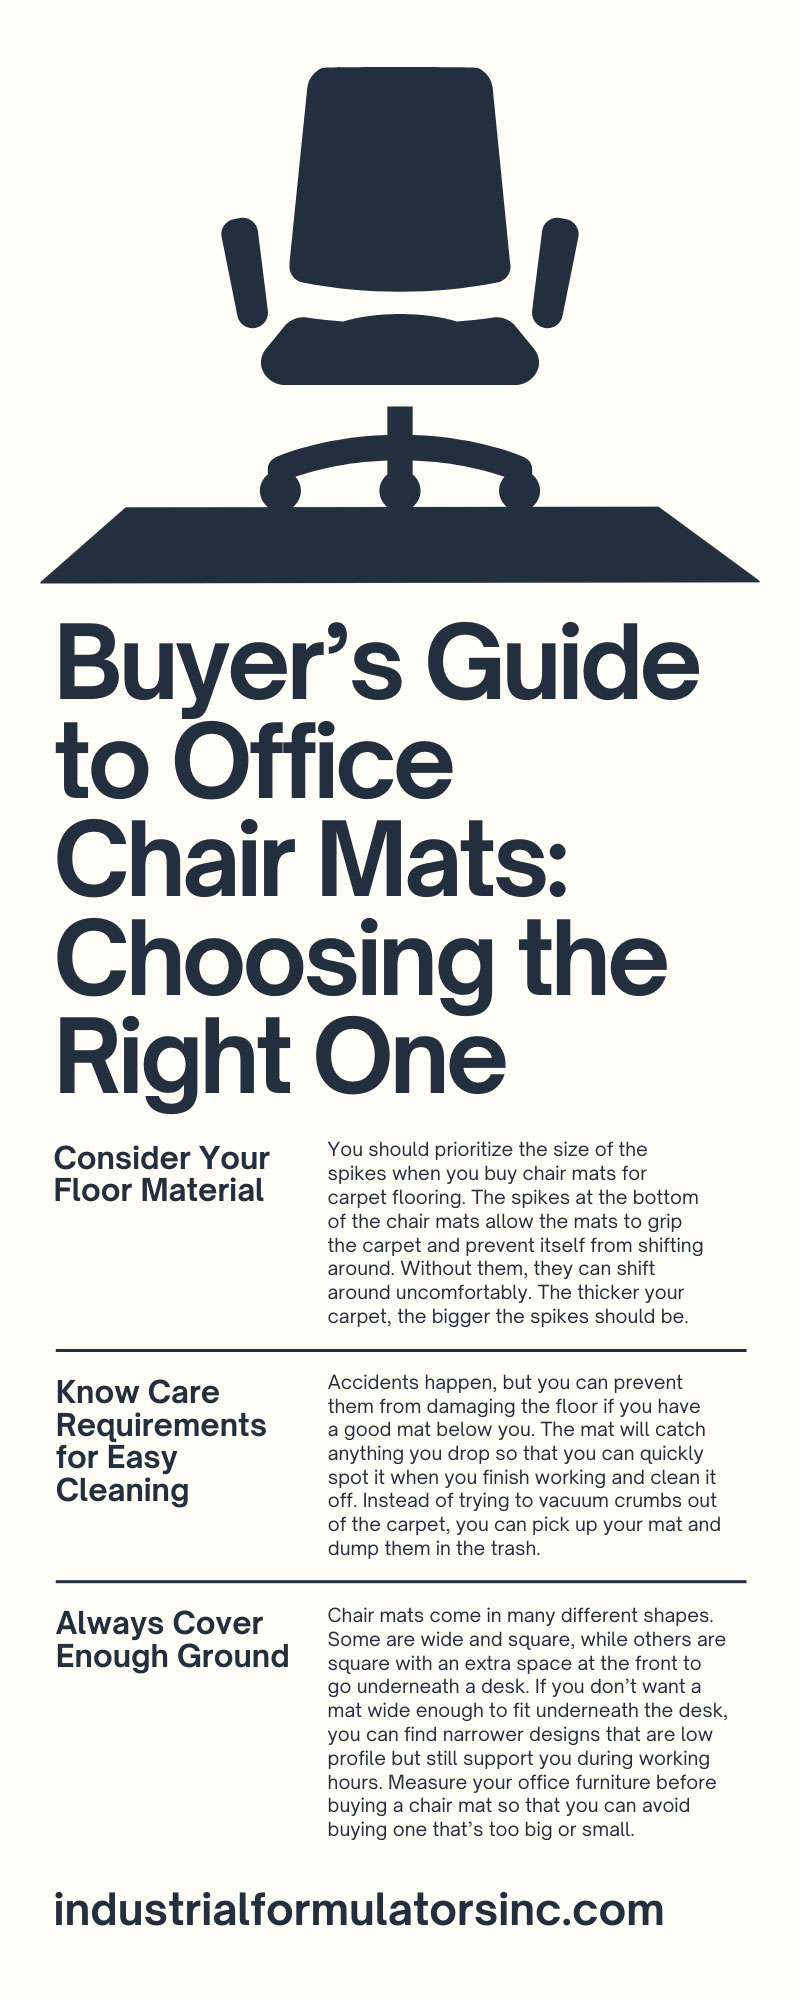 Buyer’s Guide to Office Chair Mats: Choosing the Right One